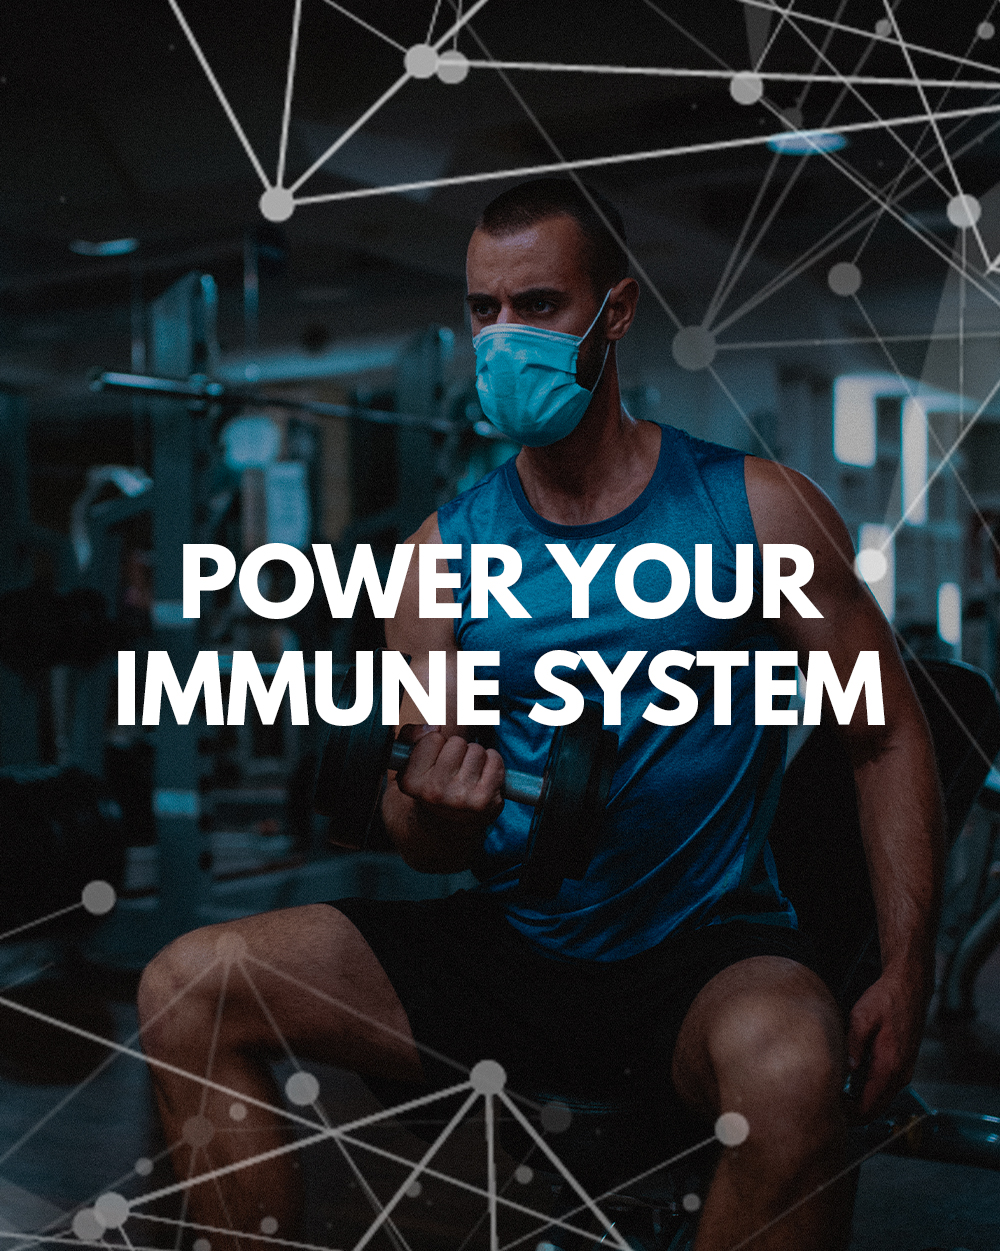 Article - power your immune system, immunity peptide, Peptides Direct by RegenMed